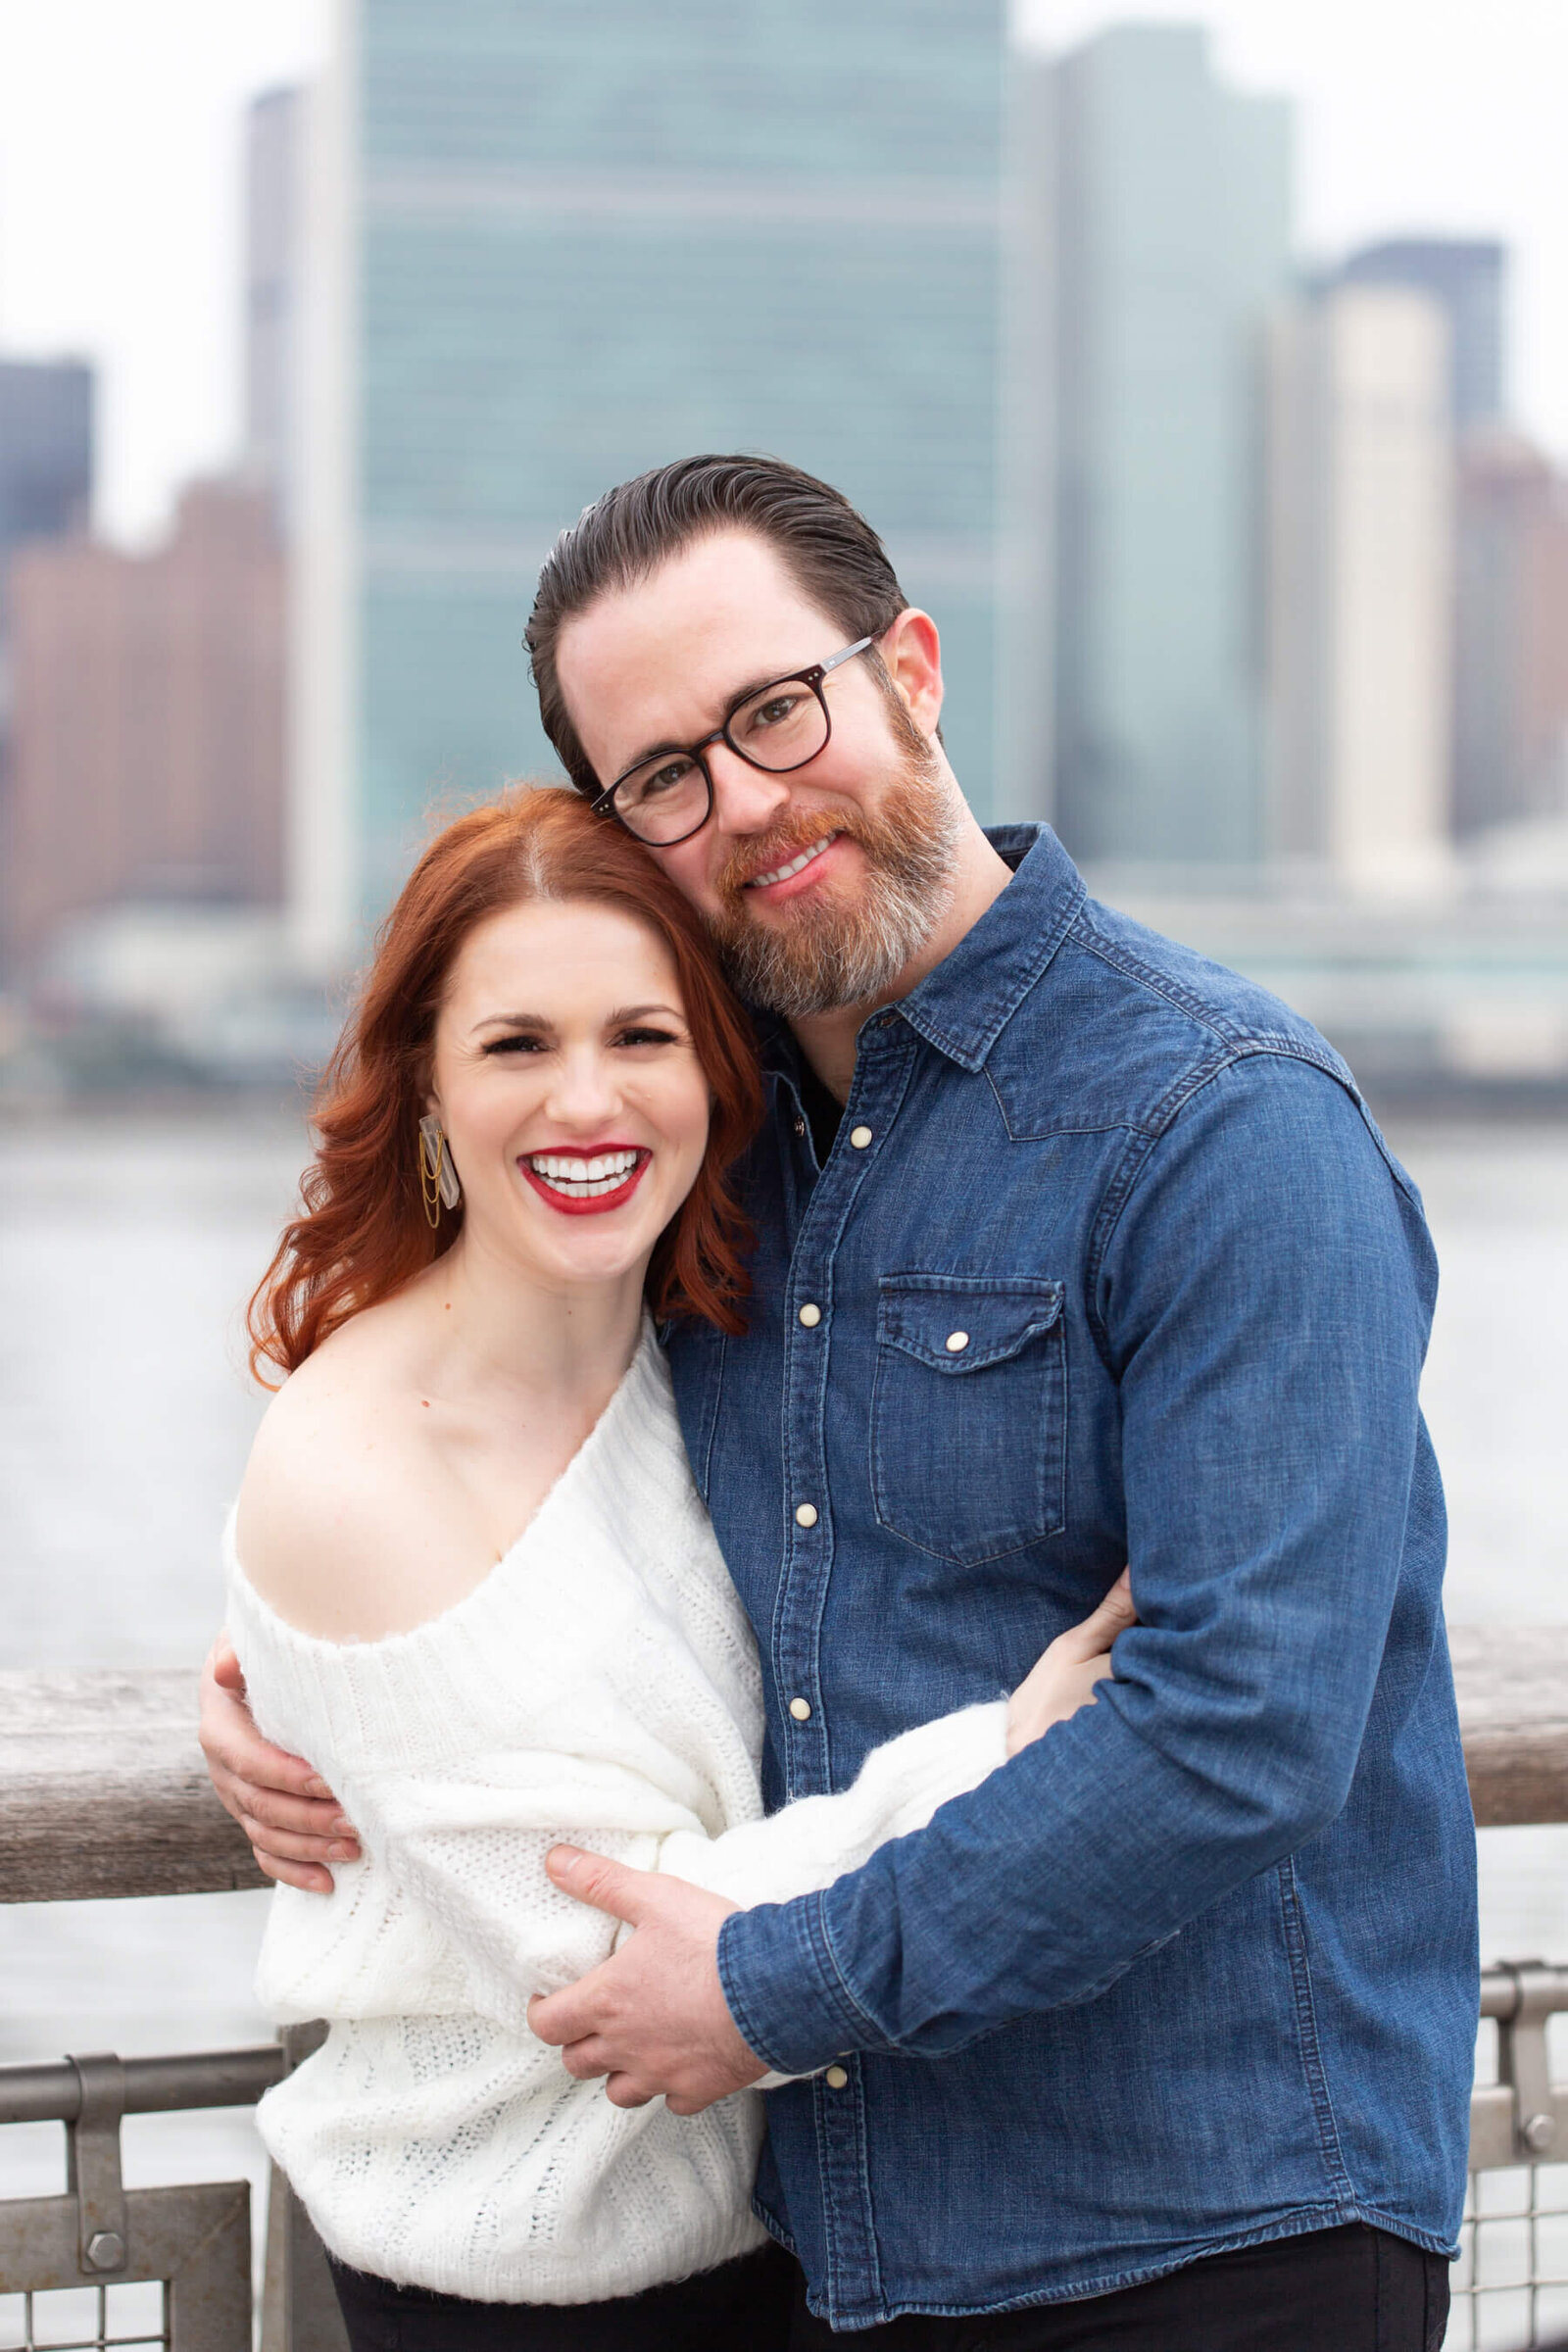 nyc-engagement-session-long-island-city-queens-skyline-red-hair-2